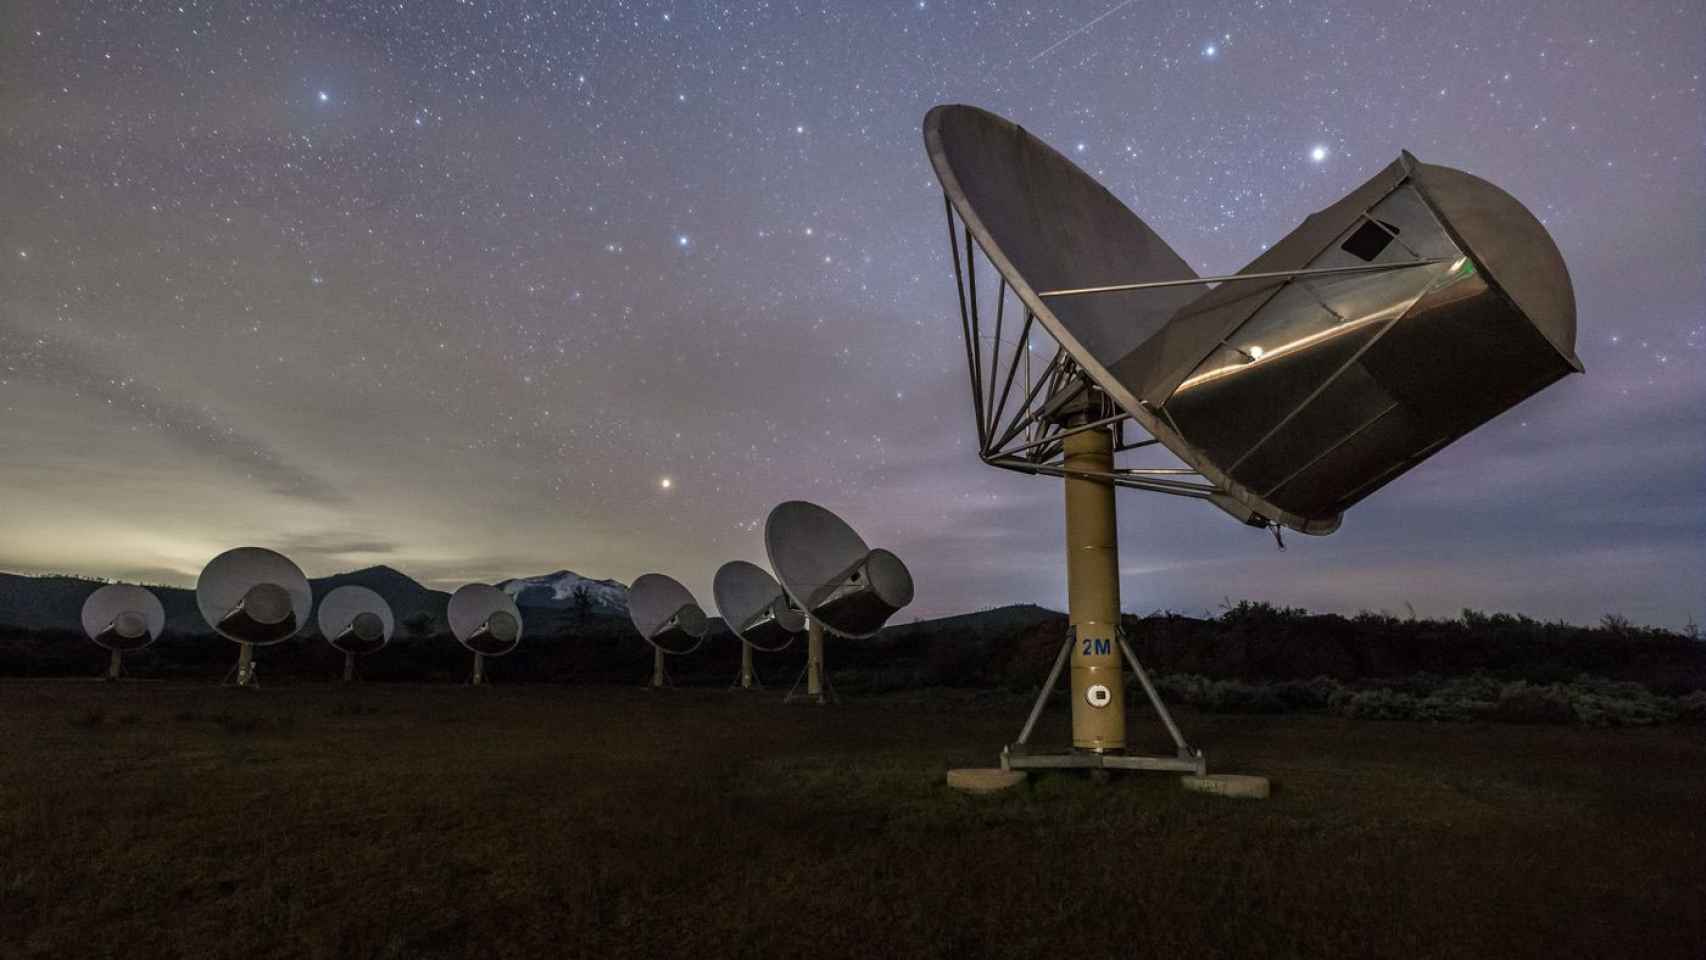 A telescope searching for extraterrestrial intelligence detected a “cosmic whistle” that lasted for days